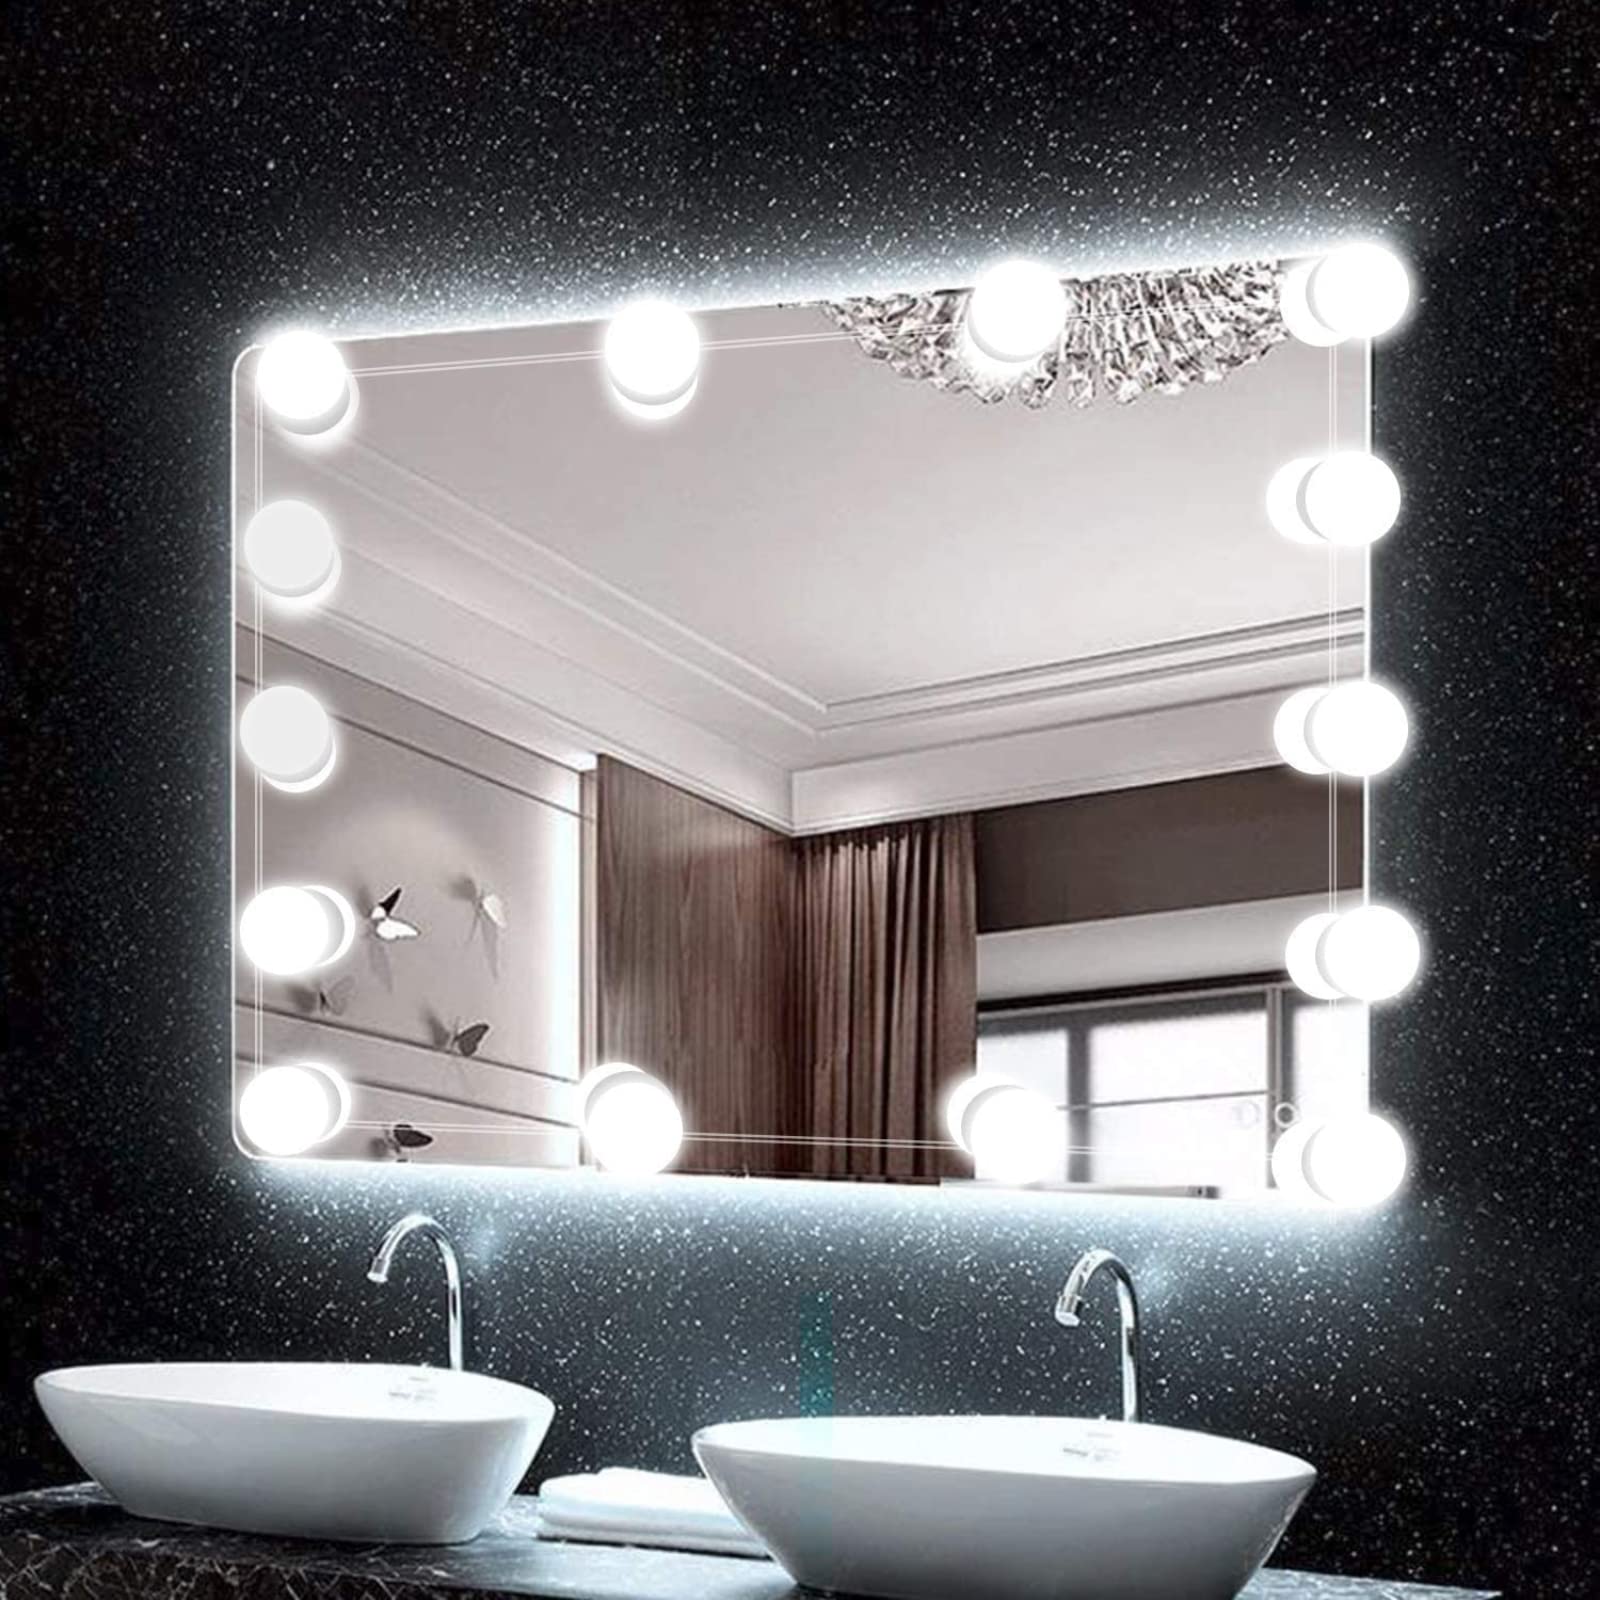 Hollywood Style Led Vanity Mirror Lights Kit - Vanity Lights Have 10 Dimmable Light Bulbs for Makeup Dressing Table and Power Supply Plug in Lighting Fixture Strip, White (No Mirror Included)